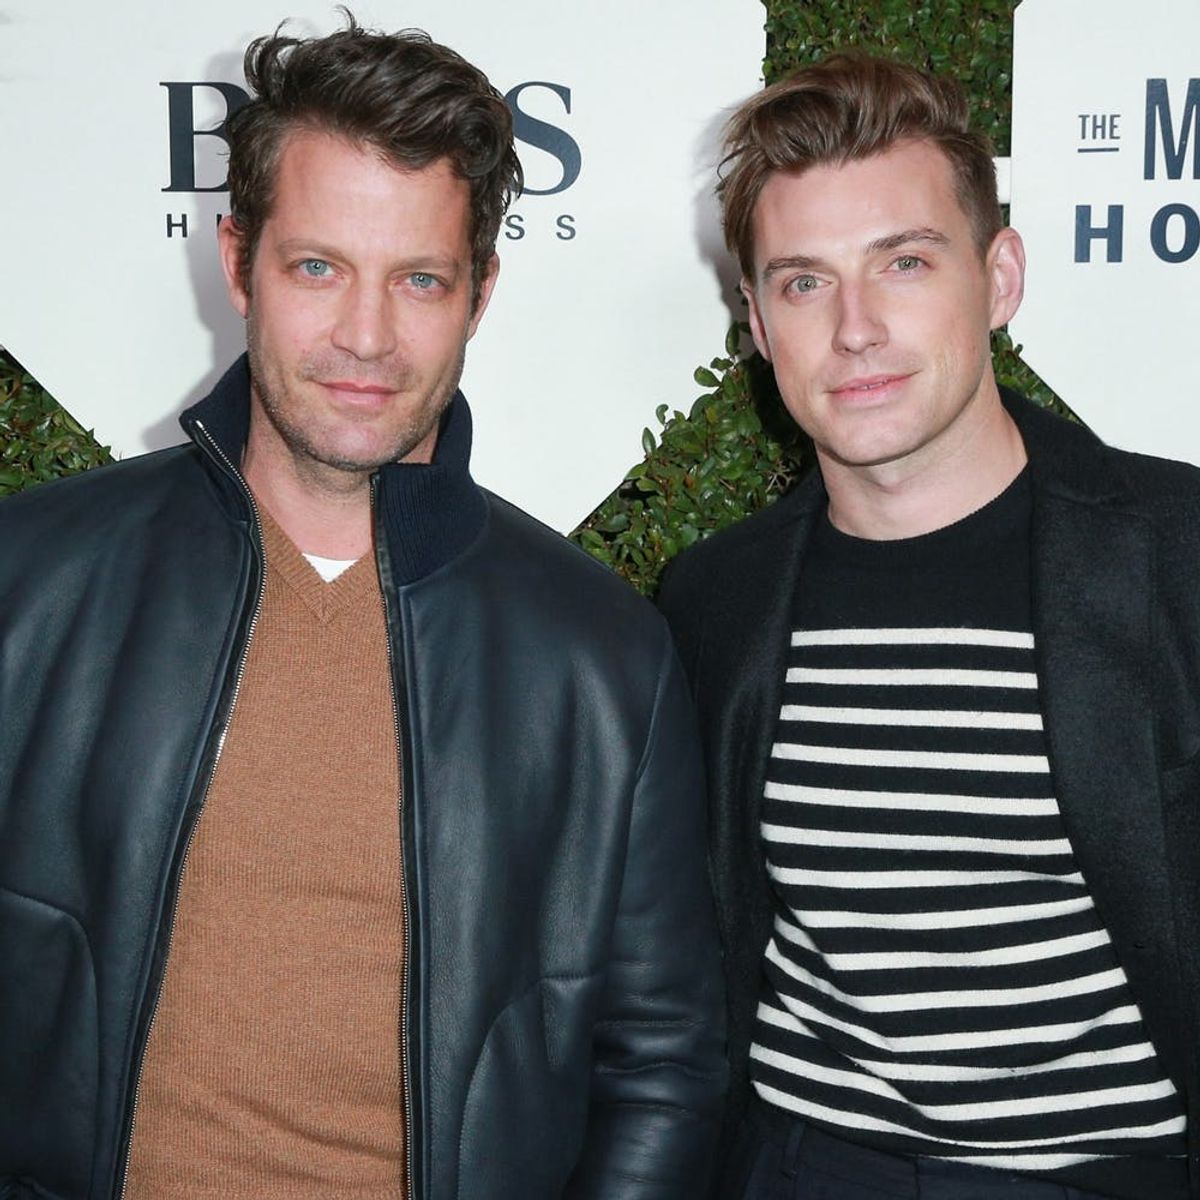 Nate Berkus and Jeremiah Brent Welcomed Baby #2 and the Announcement Is So Meaningful